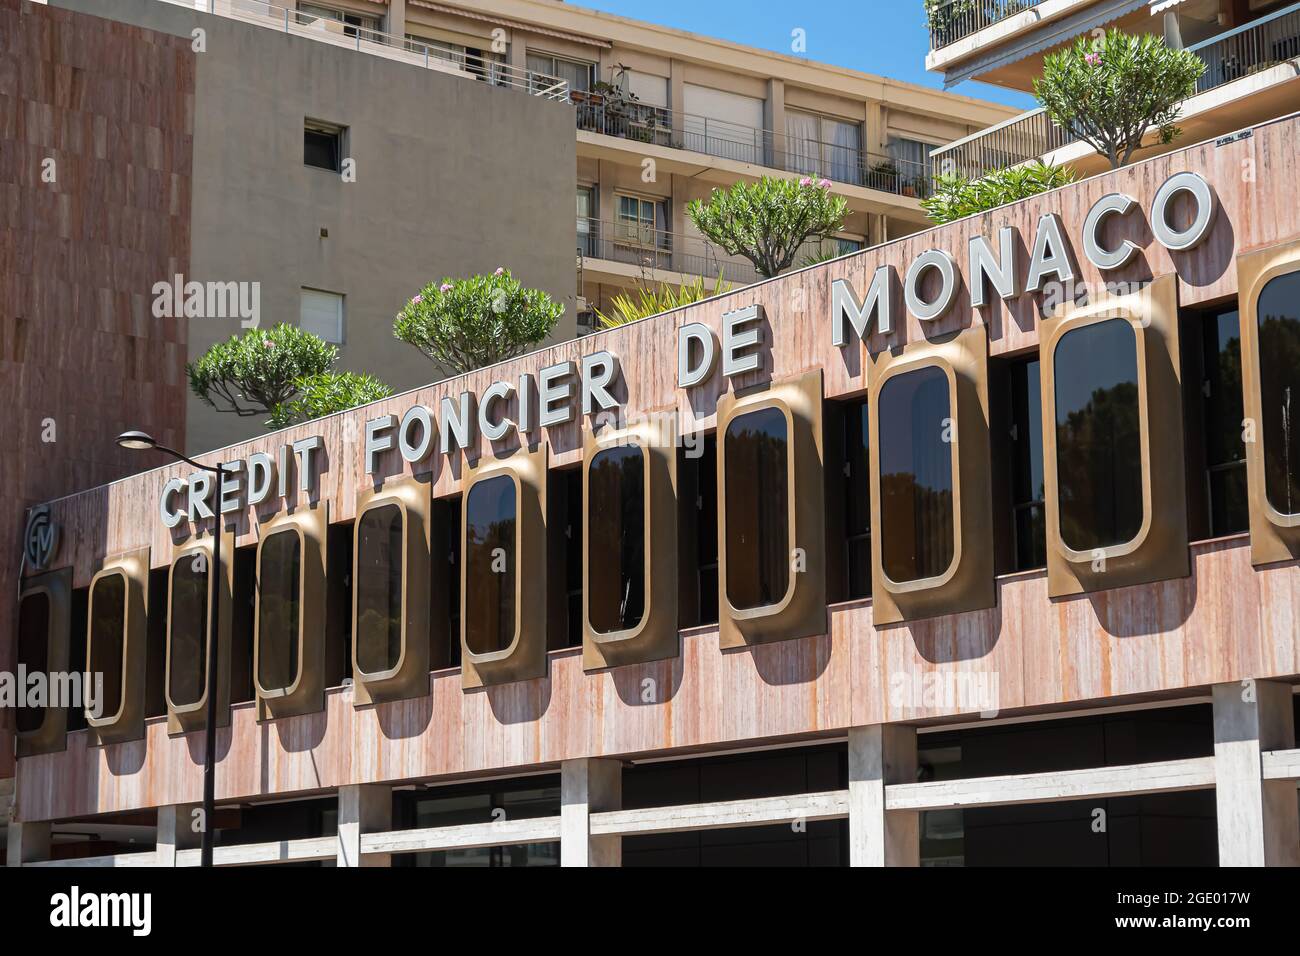 Monte Carlo, Monaco - July 4, 2020: CFM Indosuez Wealth Management was established in 1922. It is a subsidiary of Indosuez Wealth Management group Stock Photo